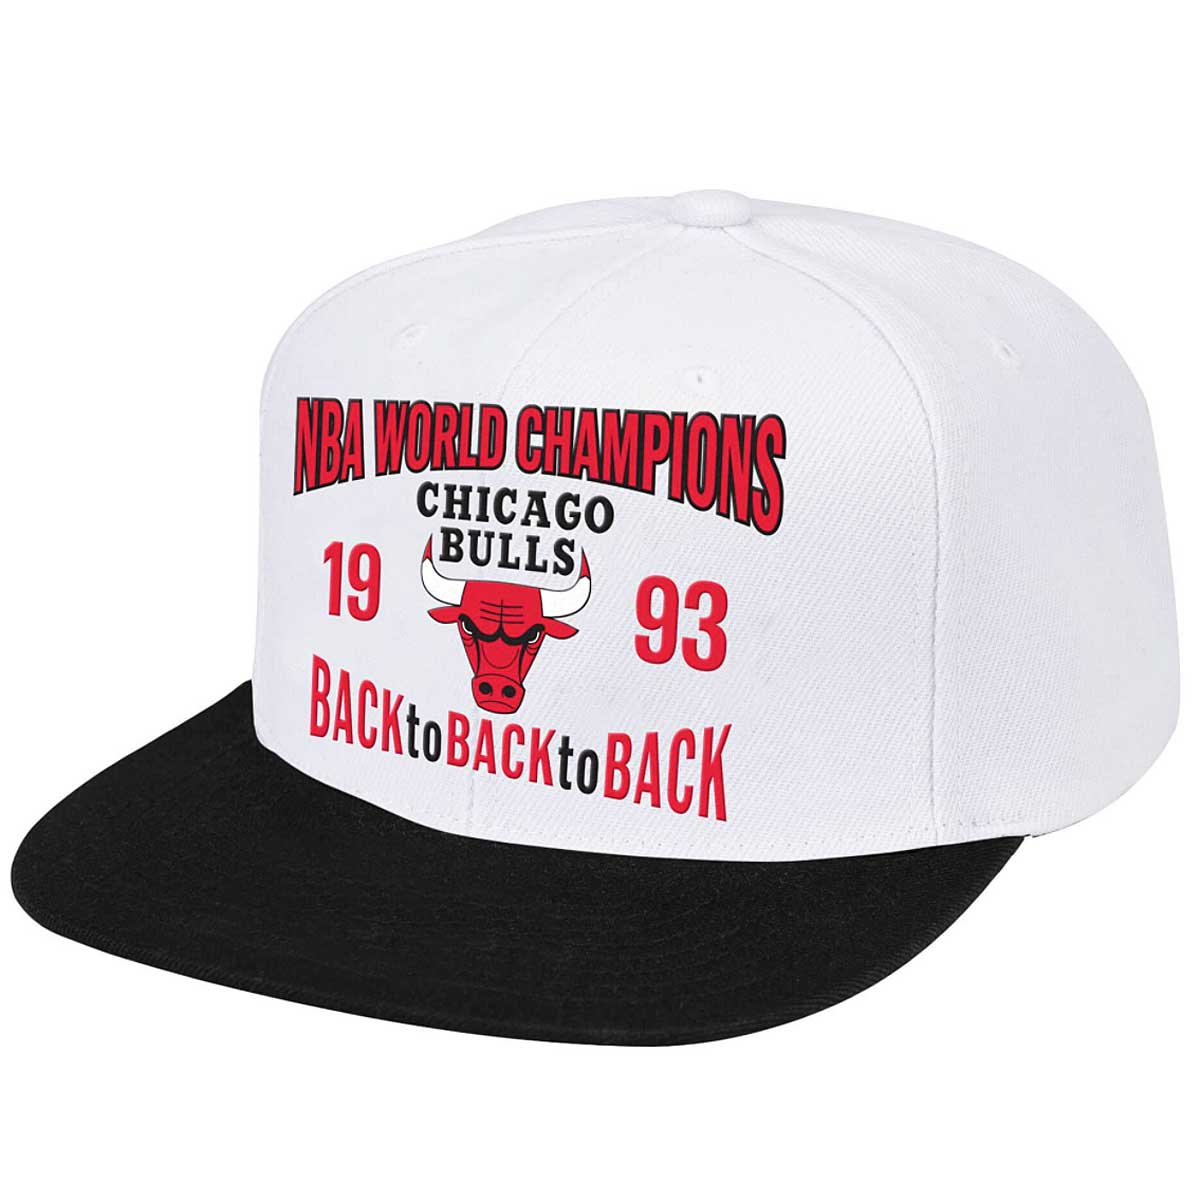 Image of Mitchell And Ness NBA Chicago Bulls Back To Back To Back 1993 Snapback Cap, White / Black